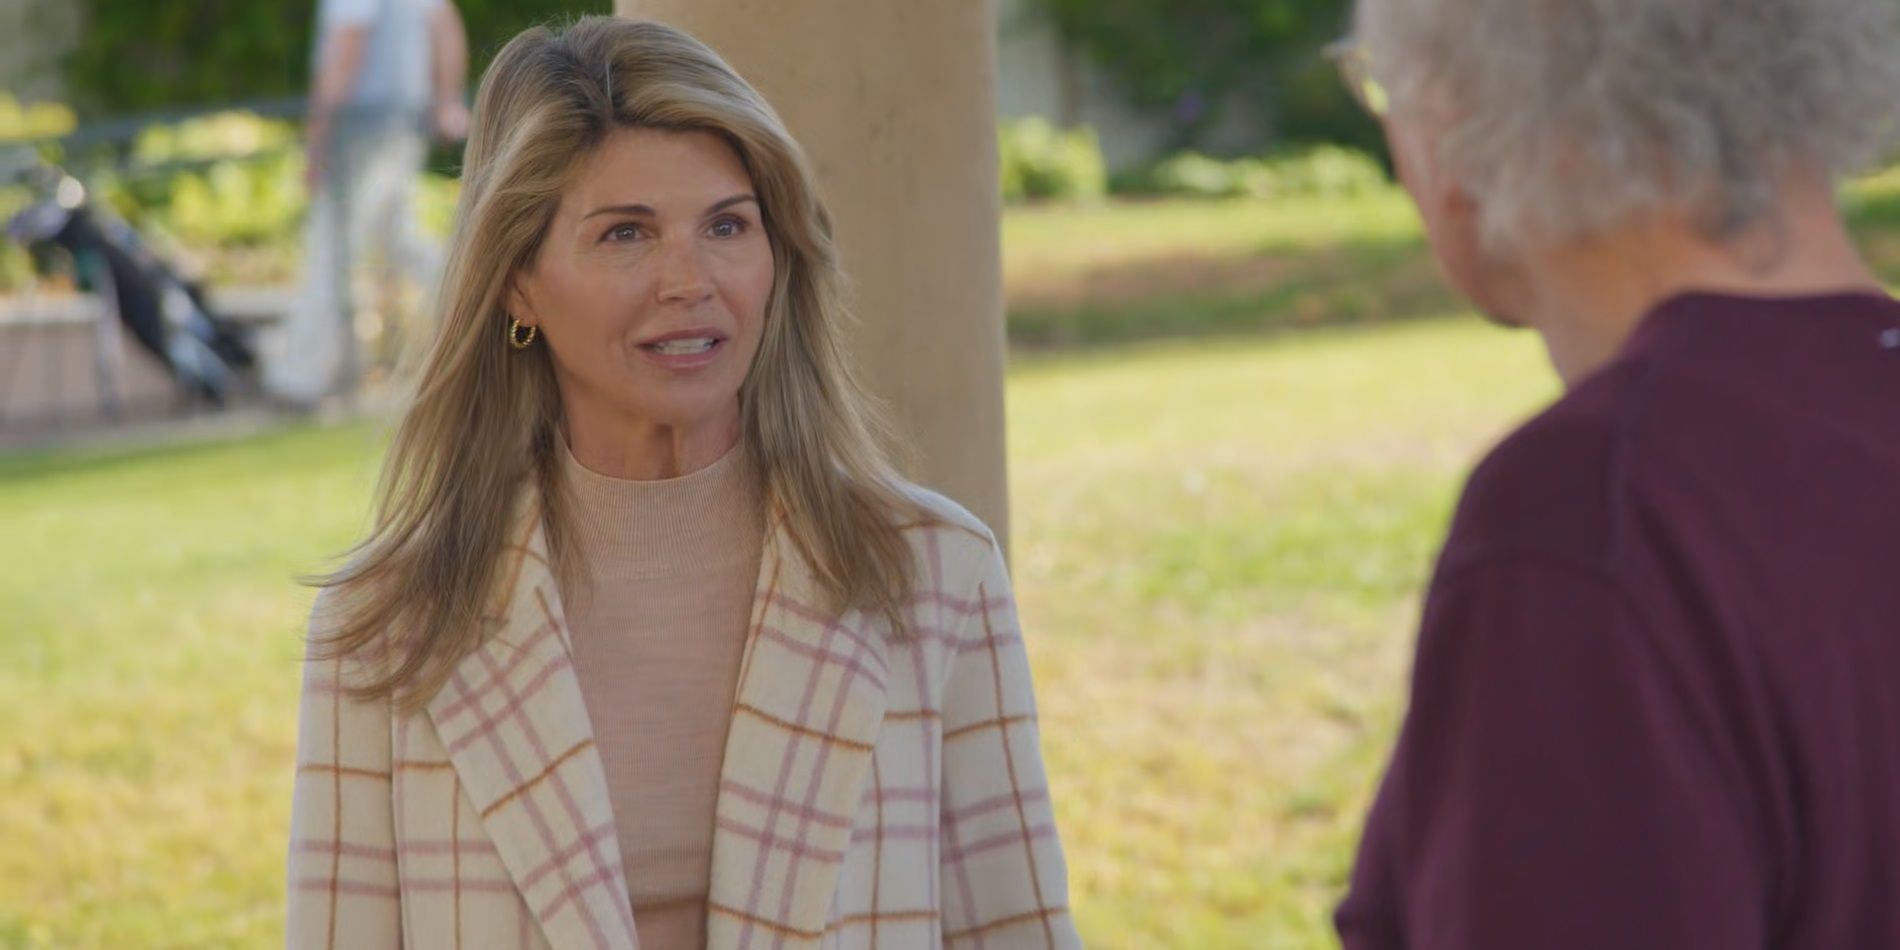 Lori Loughlin at a country club in Curb Your Enthusiasm